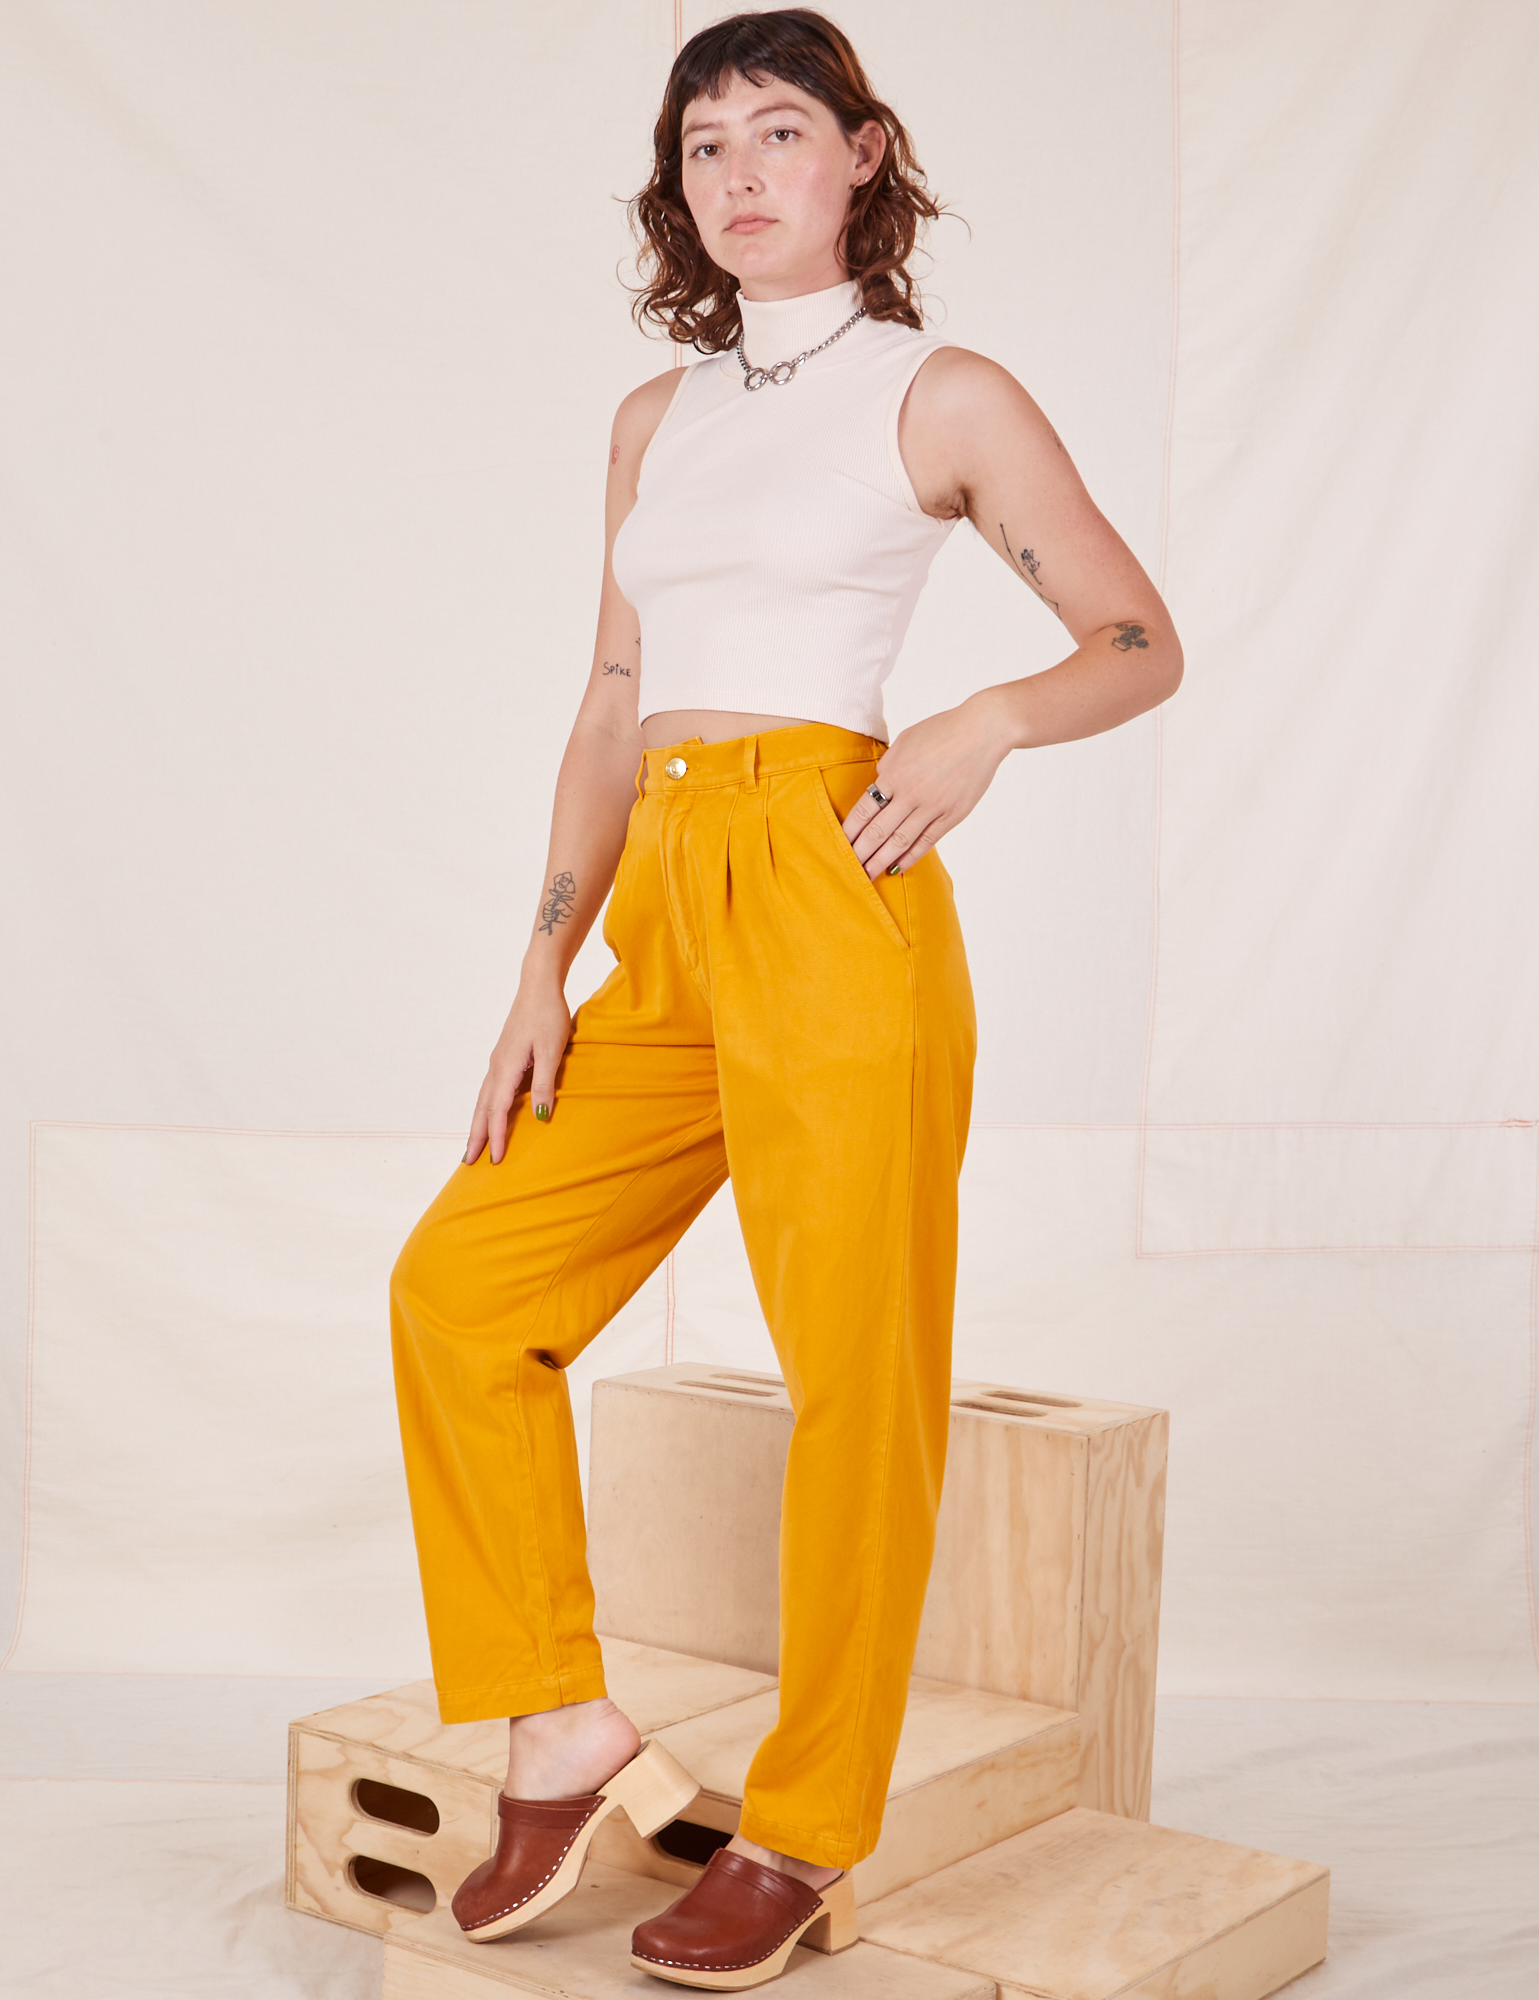 Alex is 5&#39;8&quot; and wearing XXS Organic Trousers in Mustard Yellow paired with vintage off-white Sleeveless Essential Turtleneck